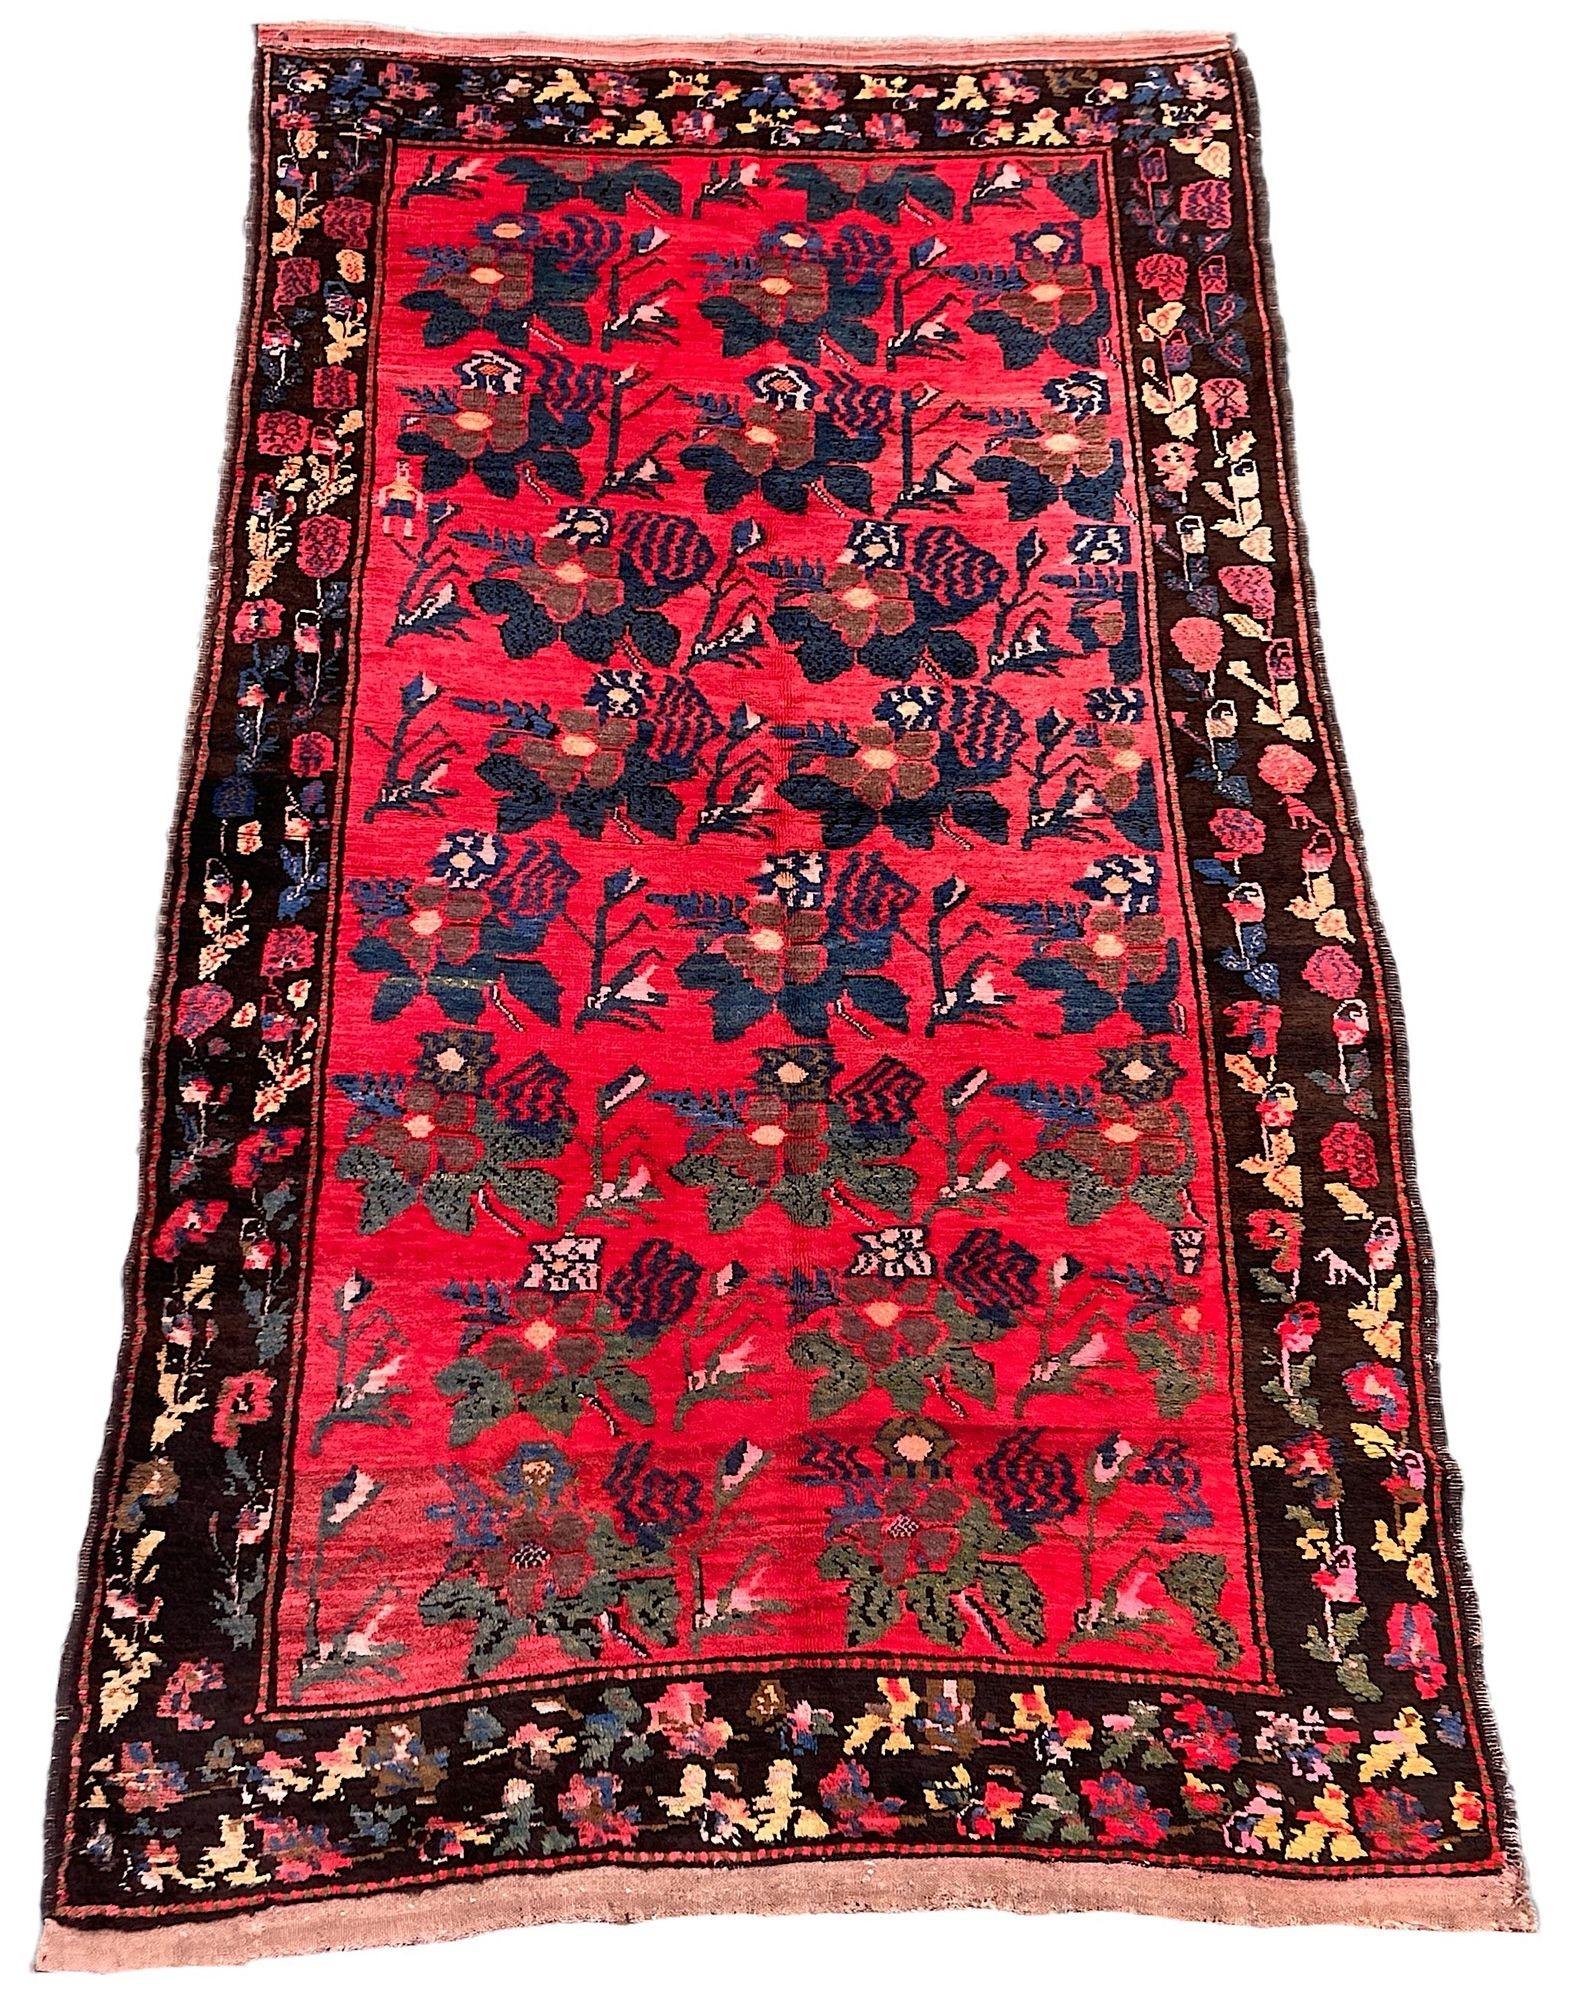 A rather funky antique Karabagh rug, hand woven in the Caucasus mountains of modern day Azerbaijan circa 1910. The rug features a repeating floral design in blues and greens on a rich red field surrounded by a charcoal border of meandering flowers.